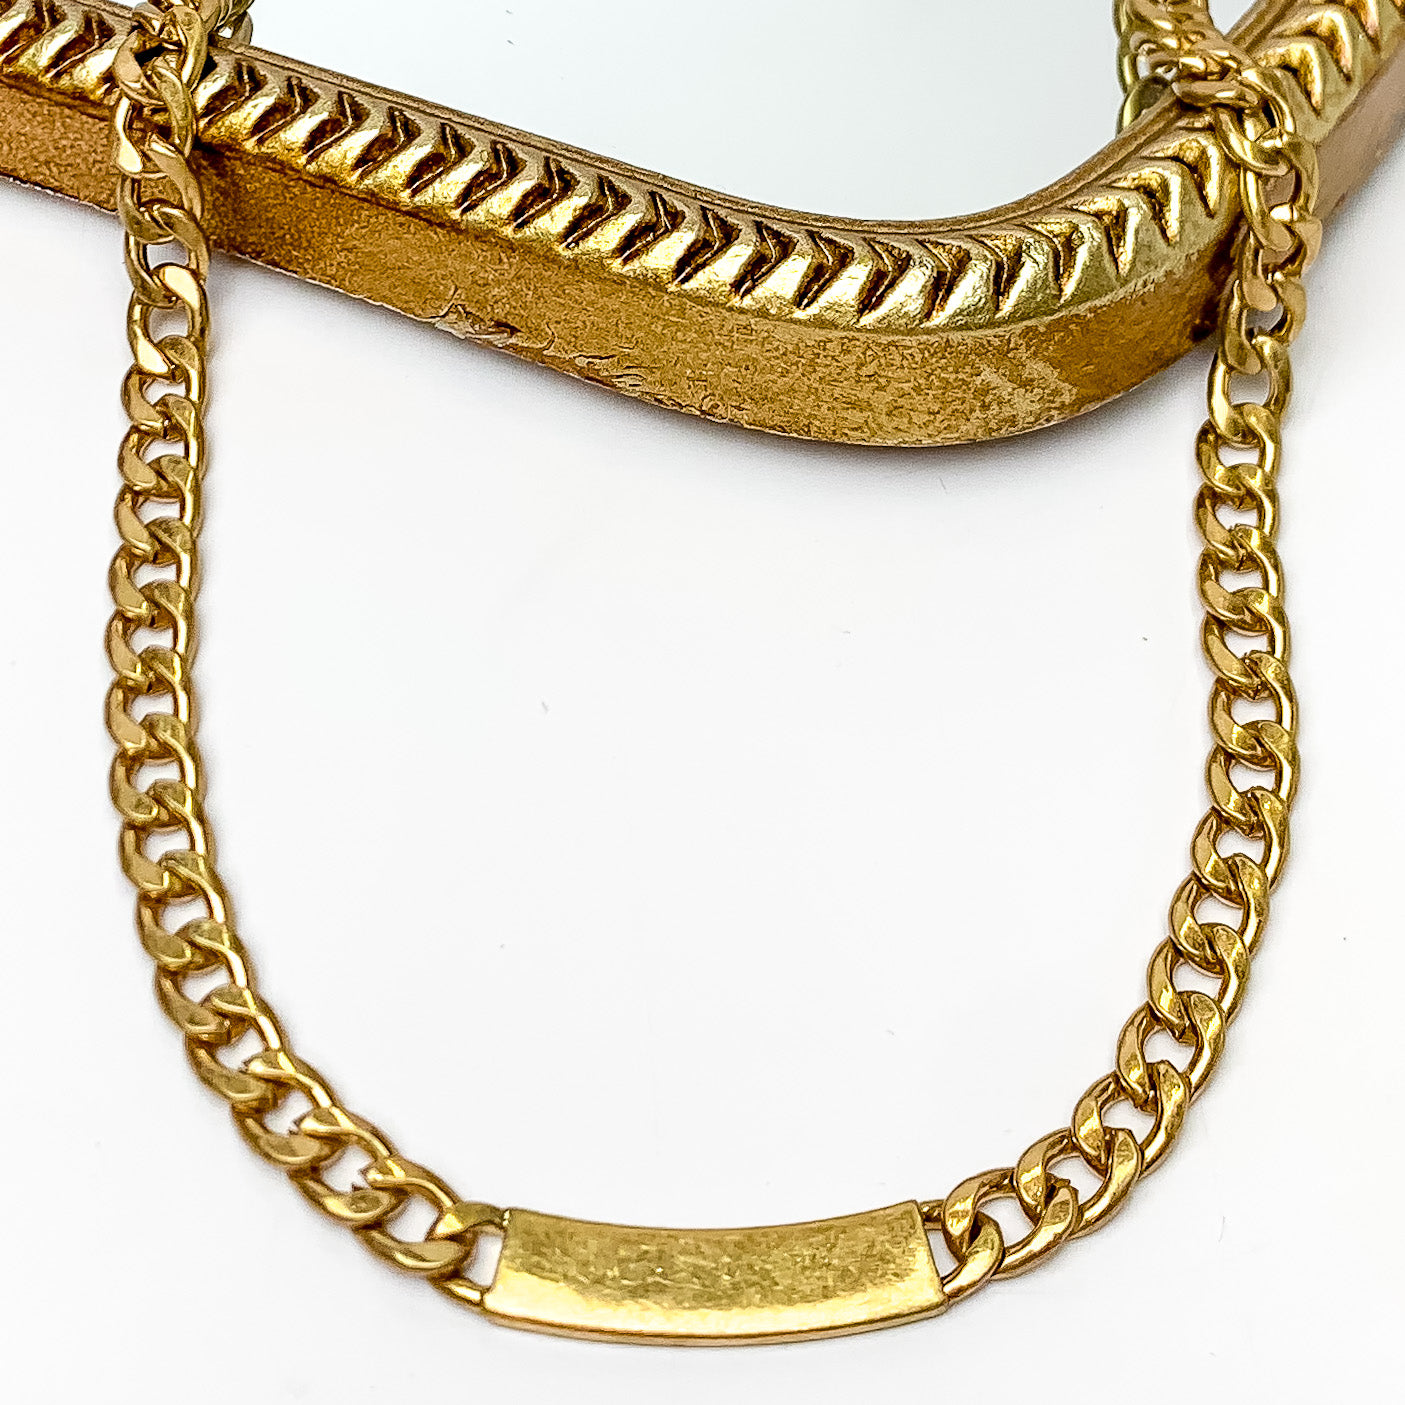 Gold Tone Chain Link Necklace with Gold Plaque - Giddy Up Glamour Boutique